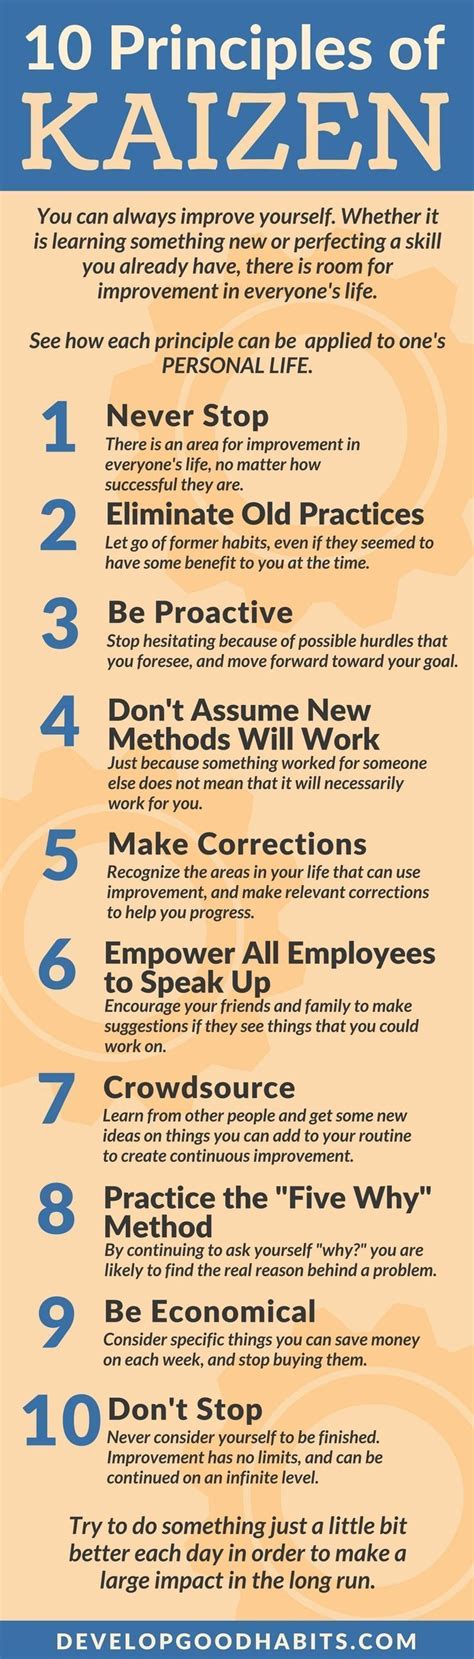 10 Principles Of Kaizen Infographic Click To See The Ultimate Guide To